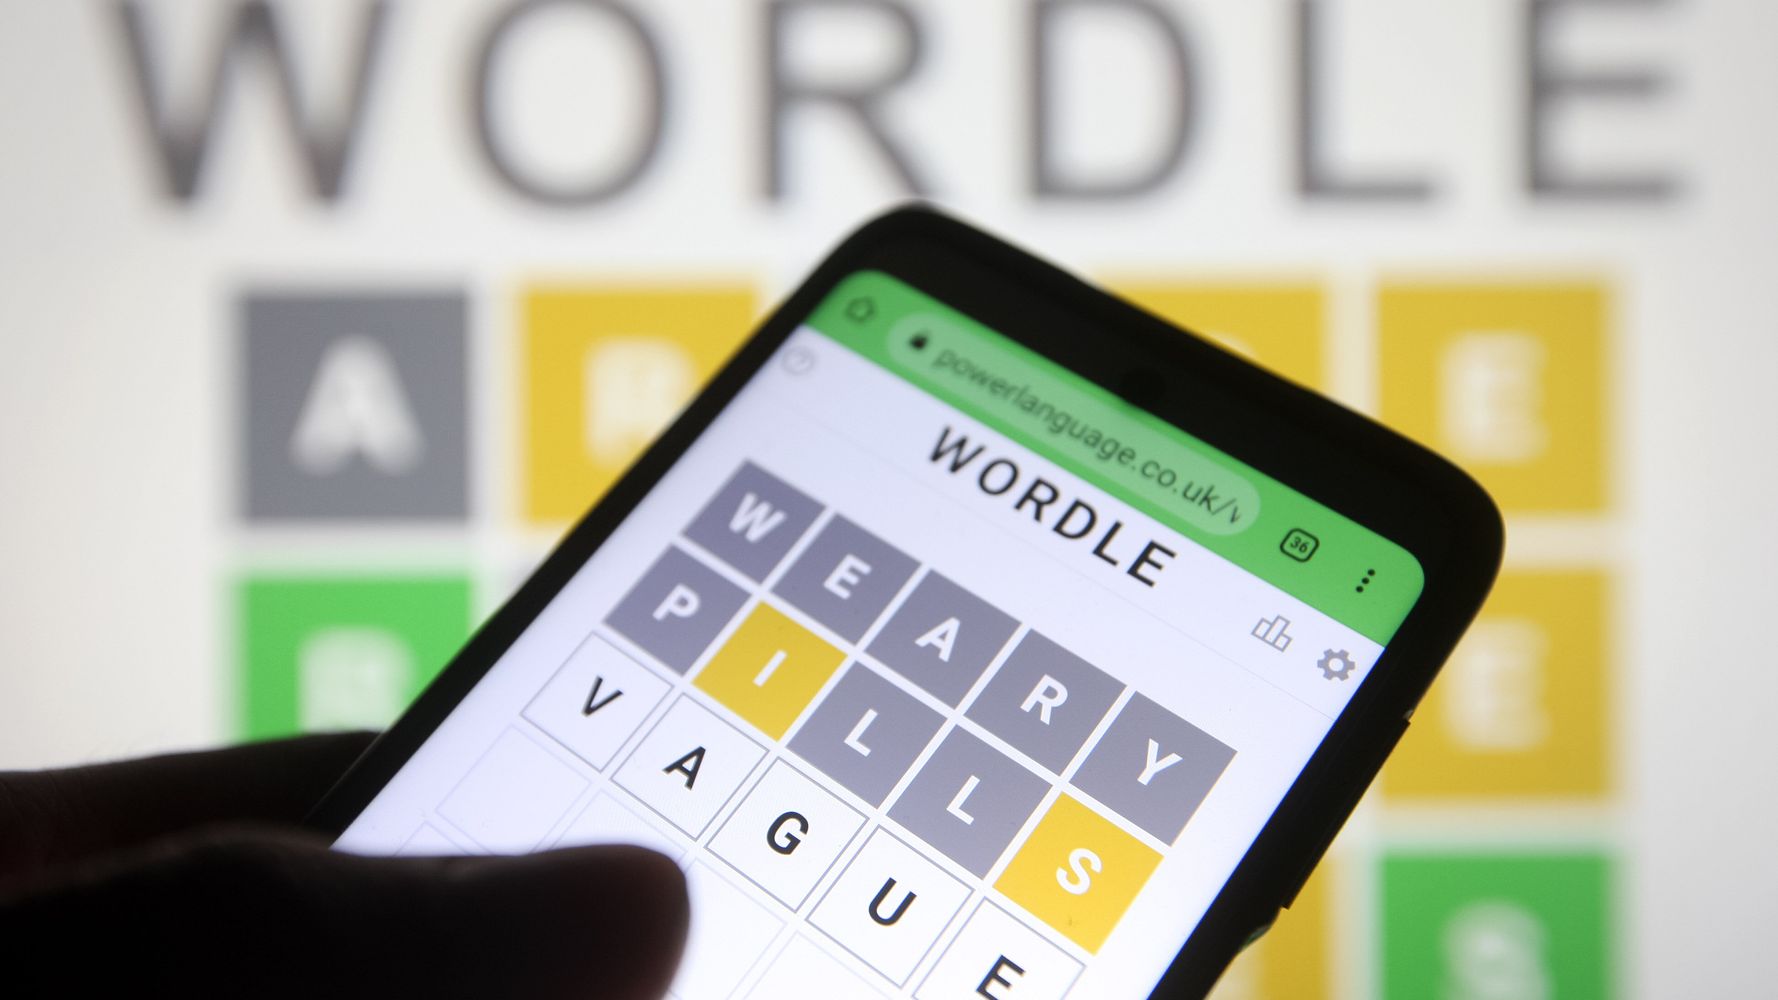 36 Fun Games Like Wordle For Every Kind of Puzzle Lover